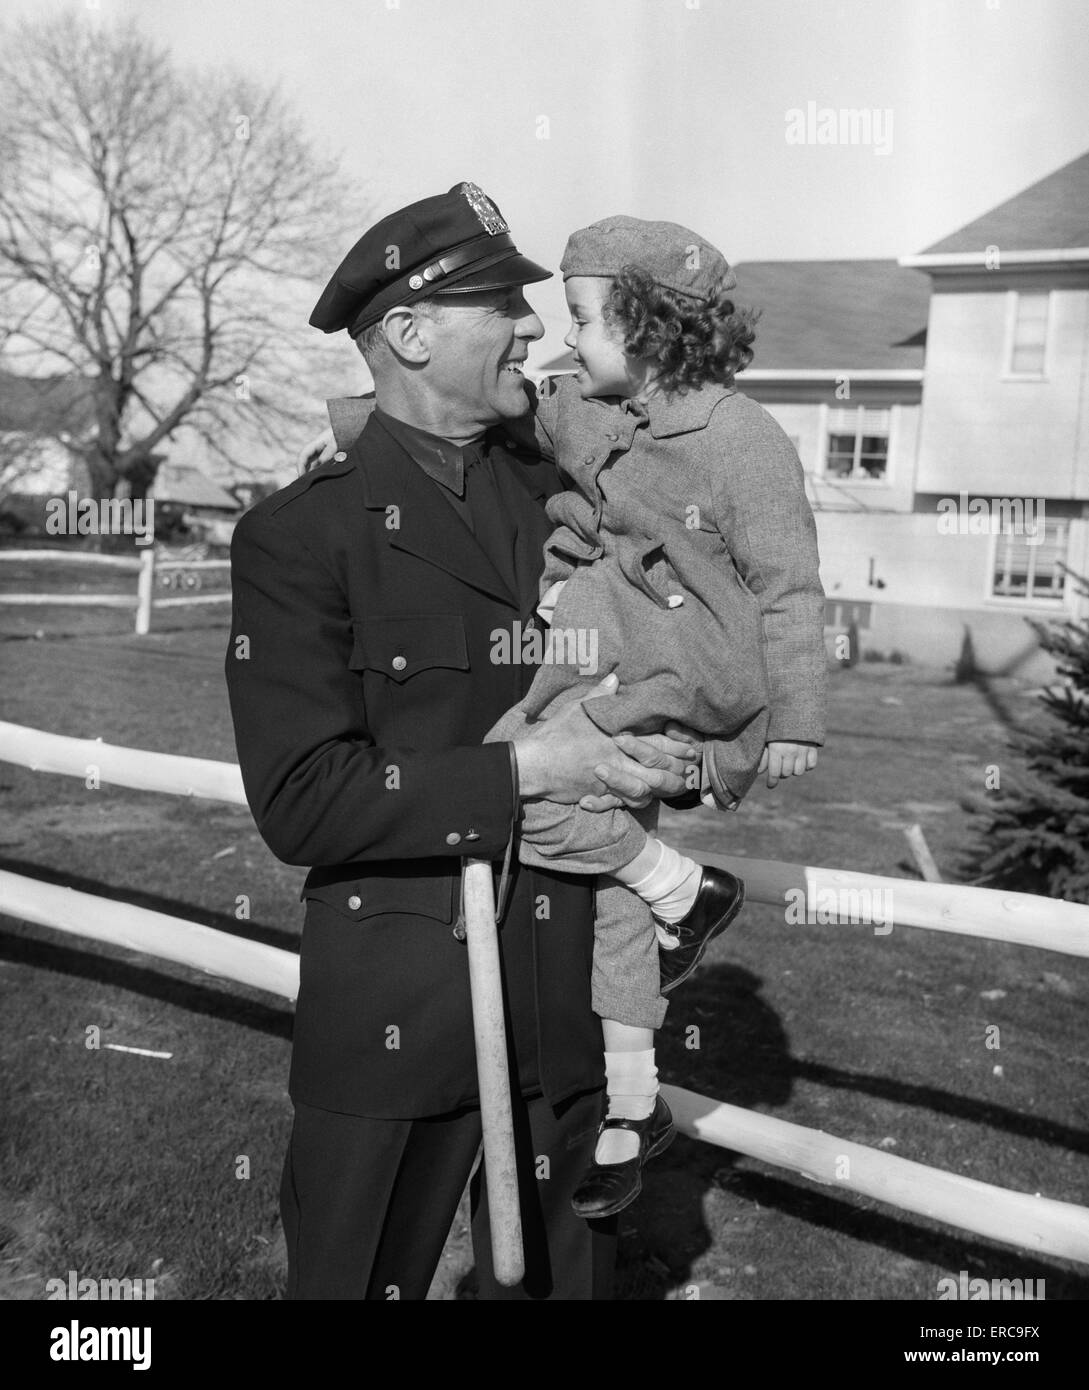 1950s POLICEMAN CARRYING YOUNG GIRL Stock Photo